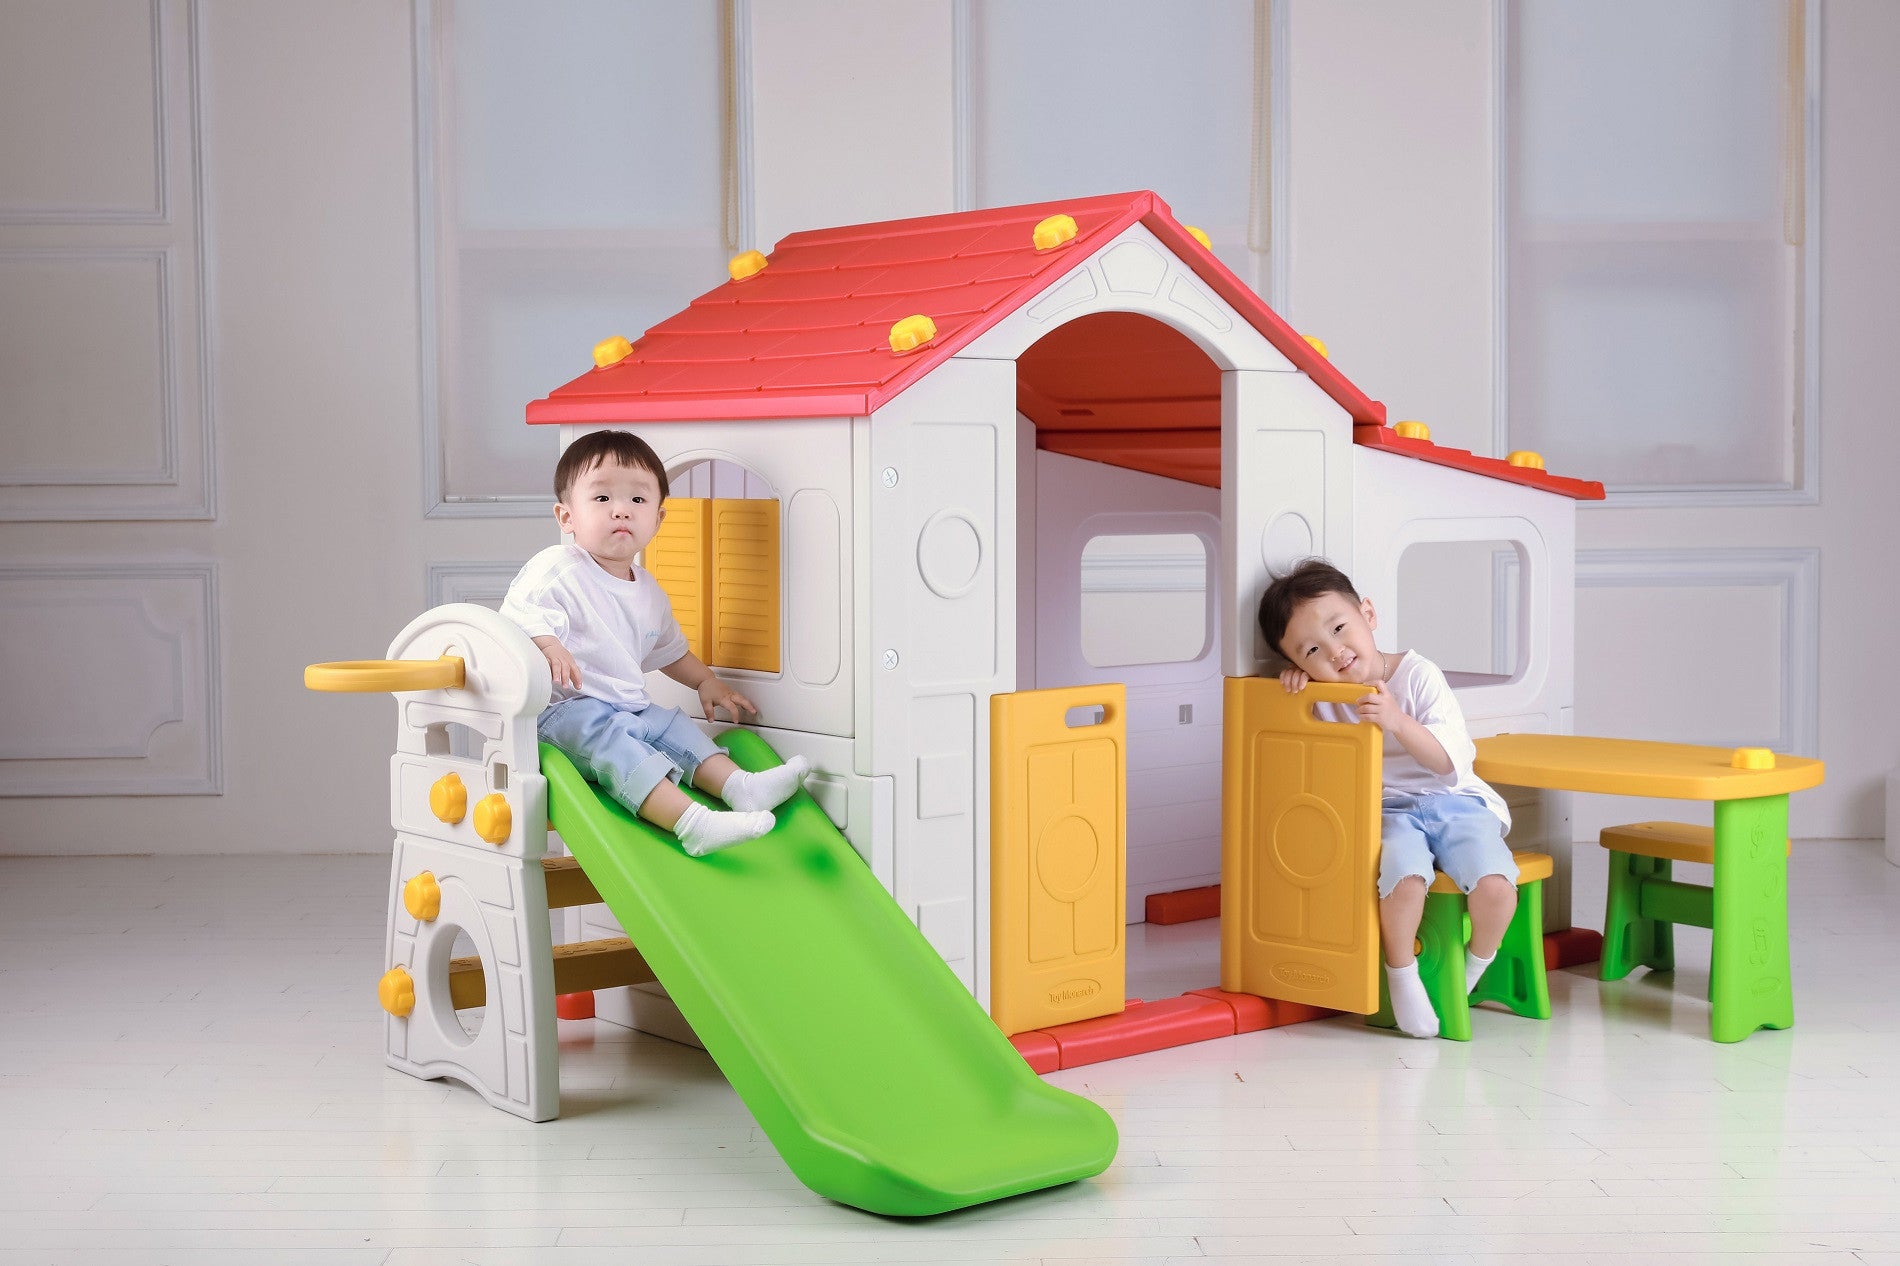 Kids Toy (Korea) Big Play House Children Playground Indoor / Outdoor 29019 With Detachable Slide, Table, 2 Chairs & Ball Ring Hoop Play Set